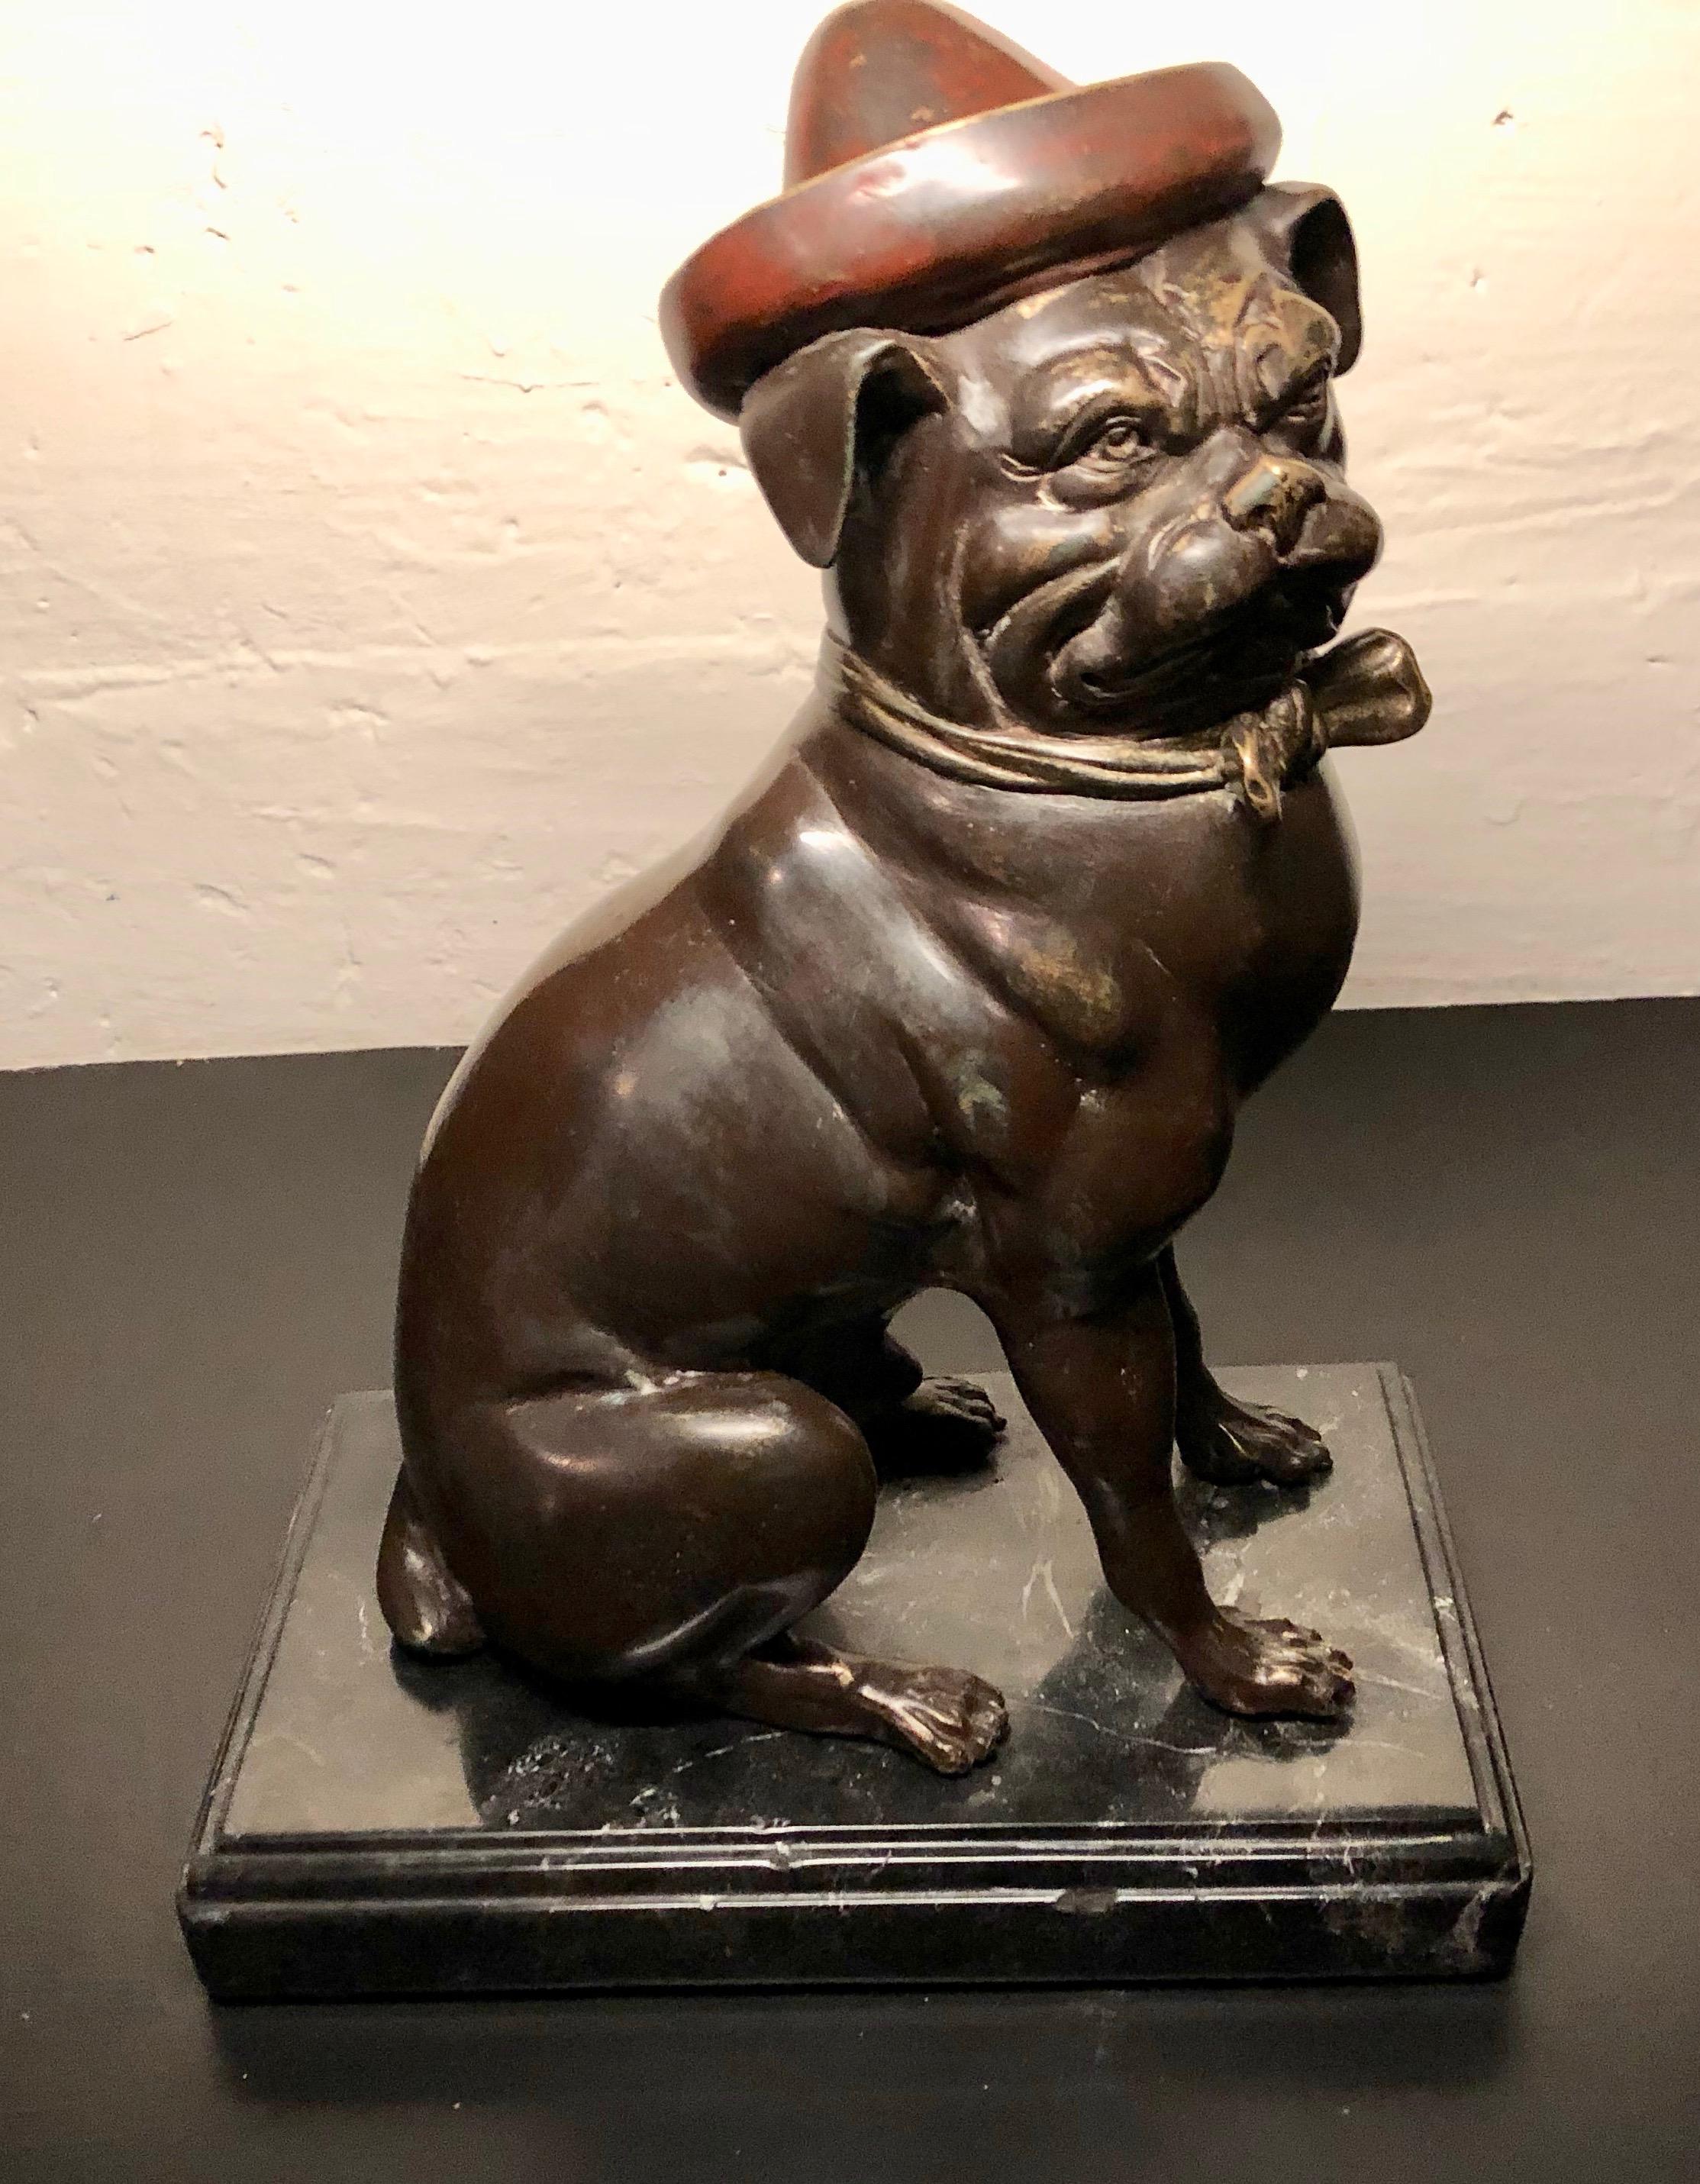 French Bulldog sculpture in bronze with cold painted enamel color. Caricatures are often seen of these unusual and highly collected dogs. This one sports a hat and bow tie. They find favour in the homes of so many animal lovers. I fell in love with